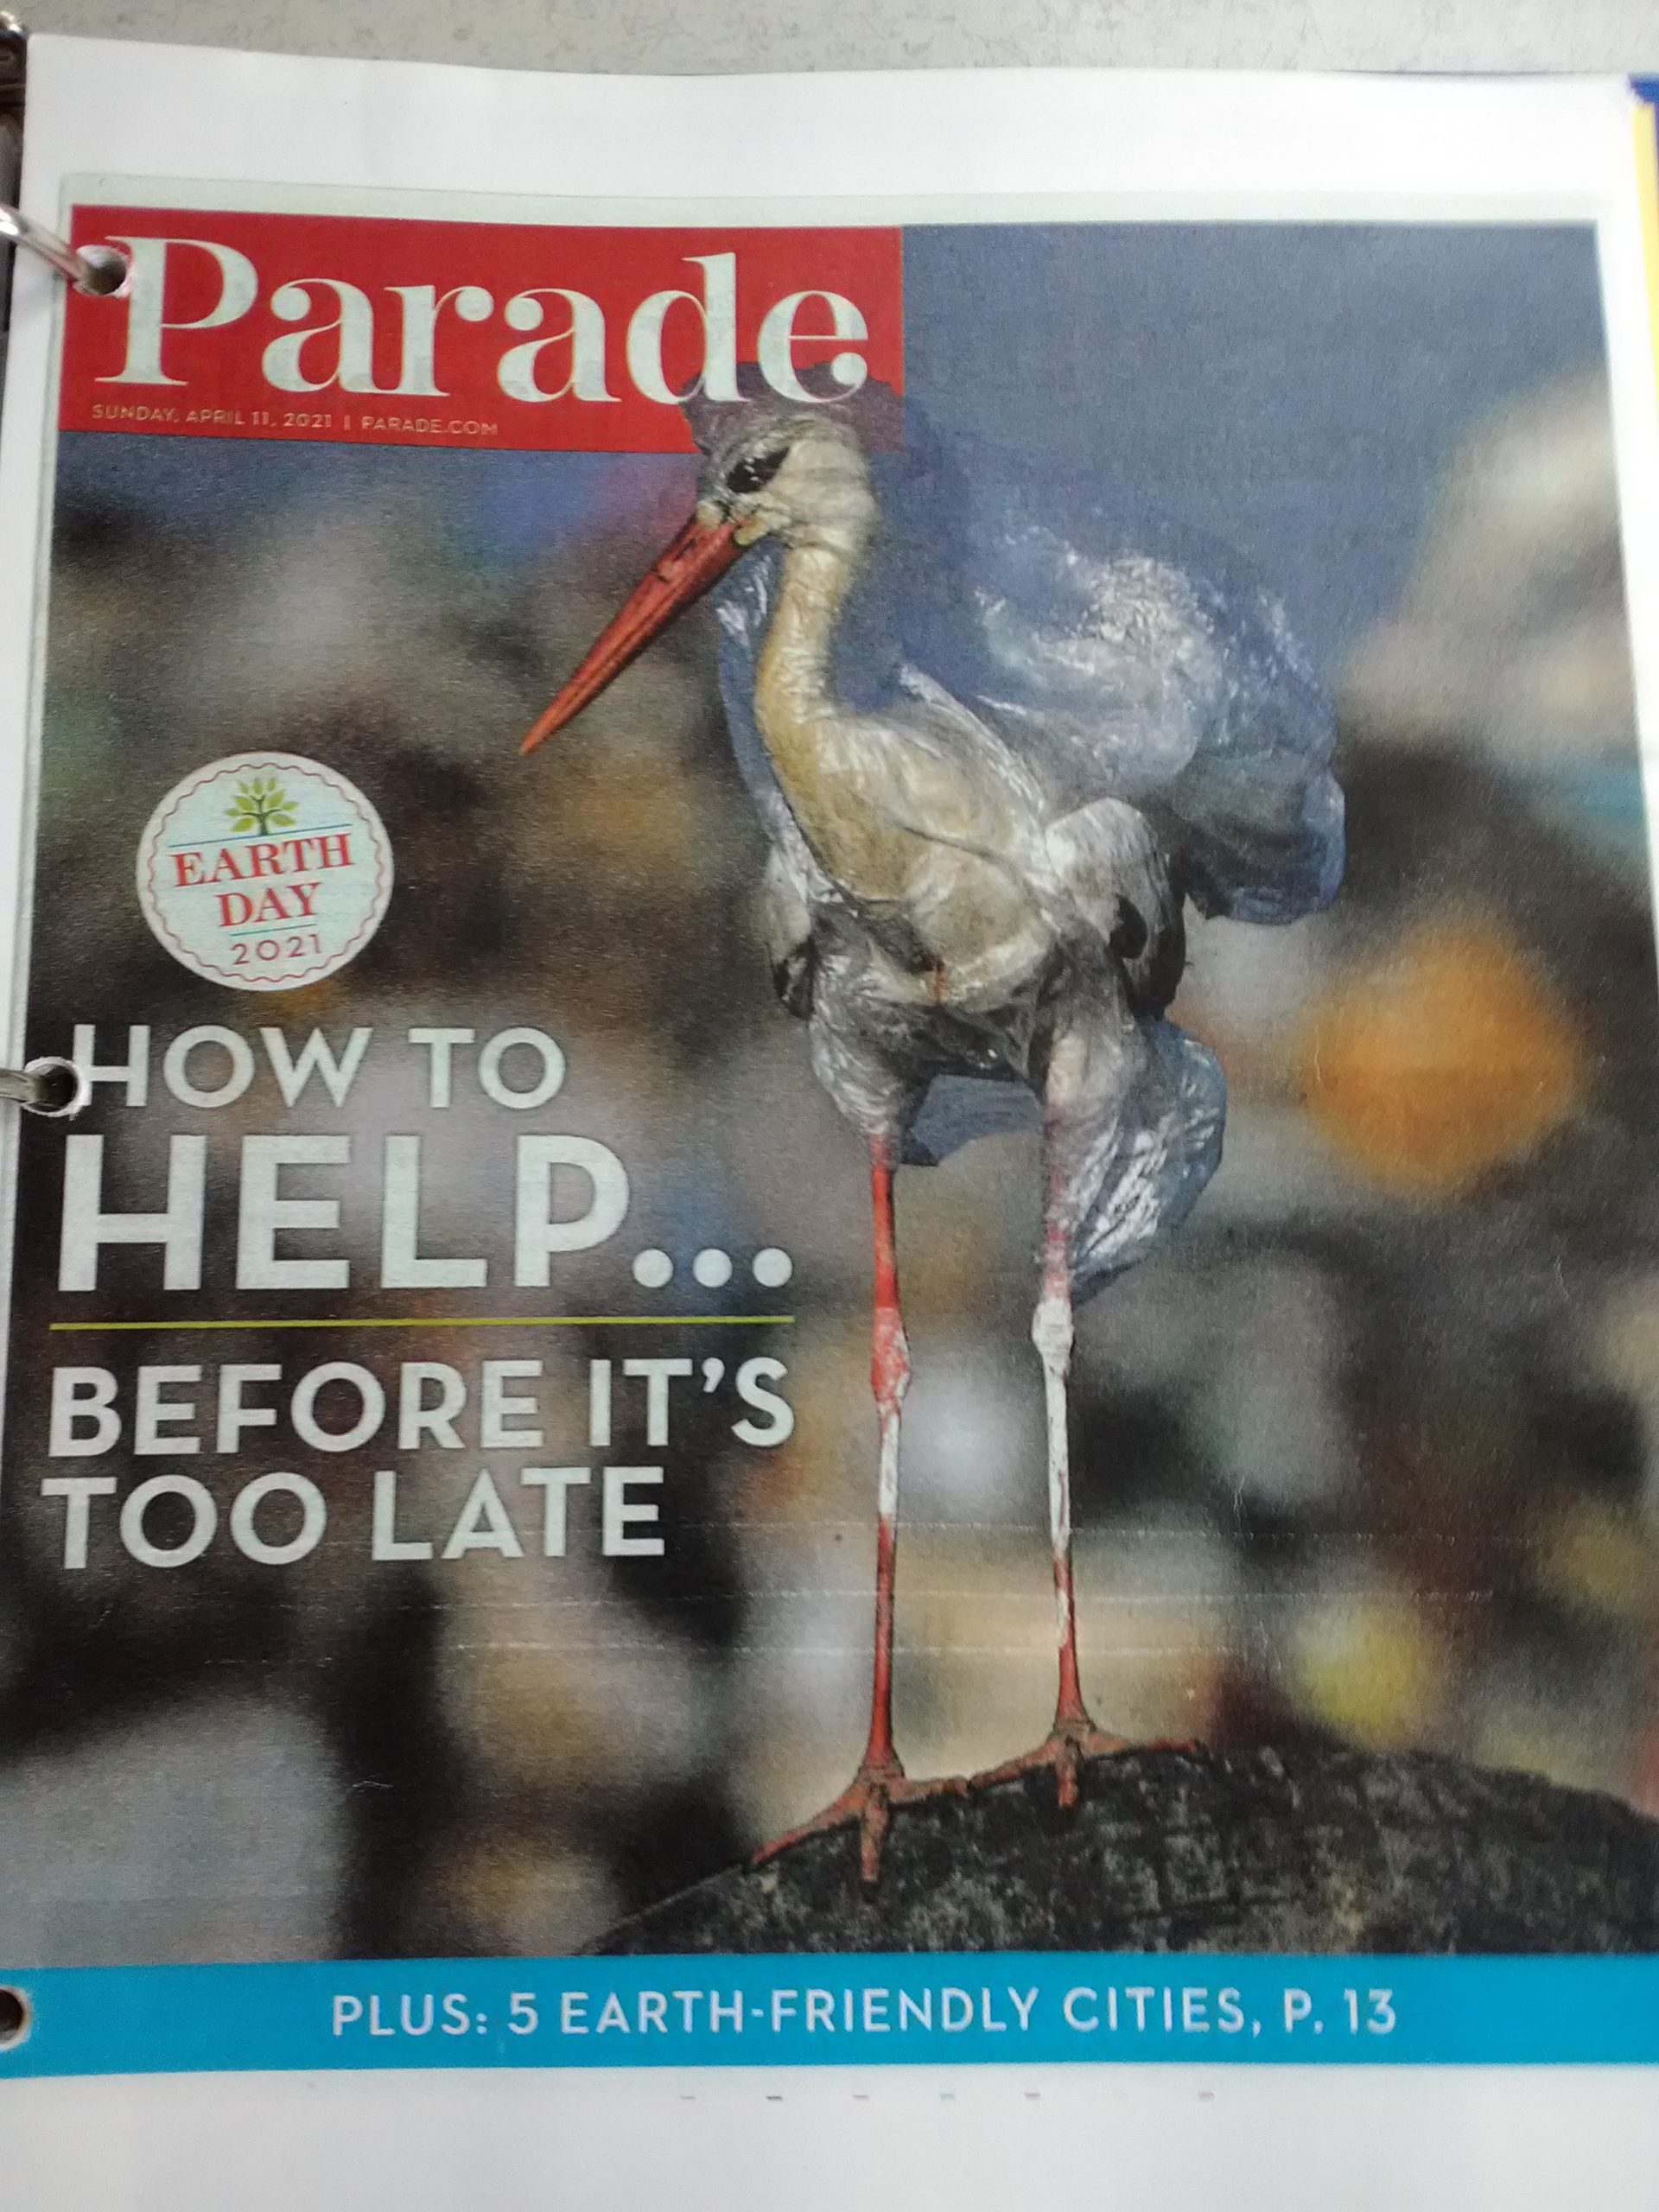 Cover of Parade magazine for Earth Day in 2021 featuring a bird wrapped in plastic waste